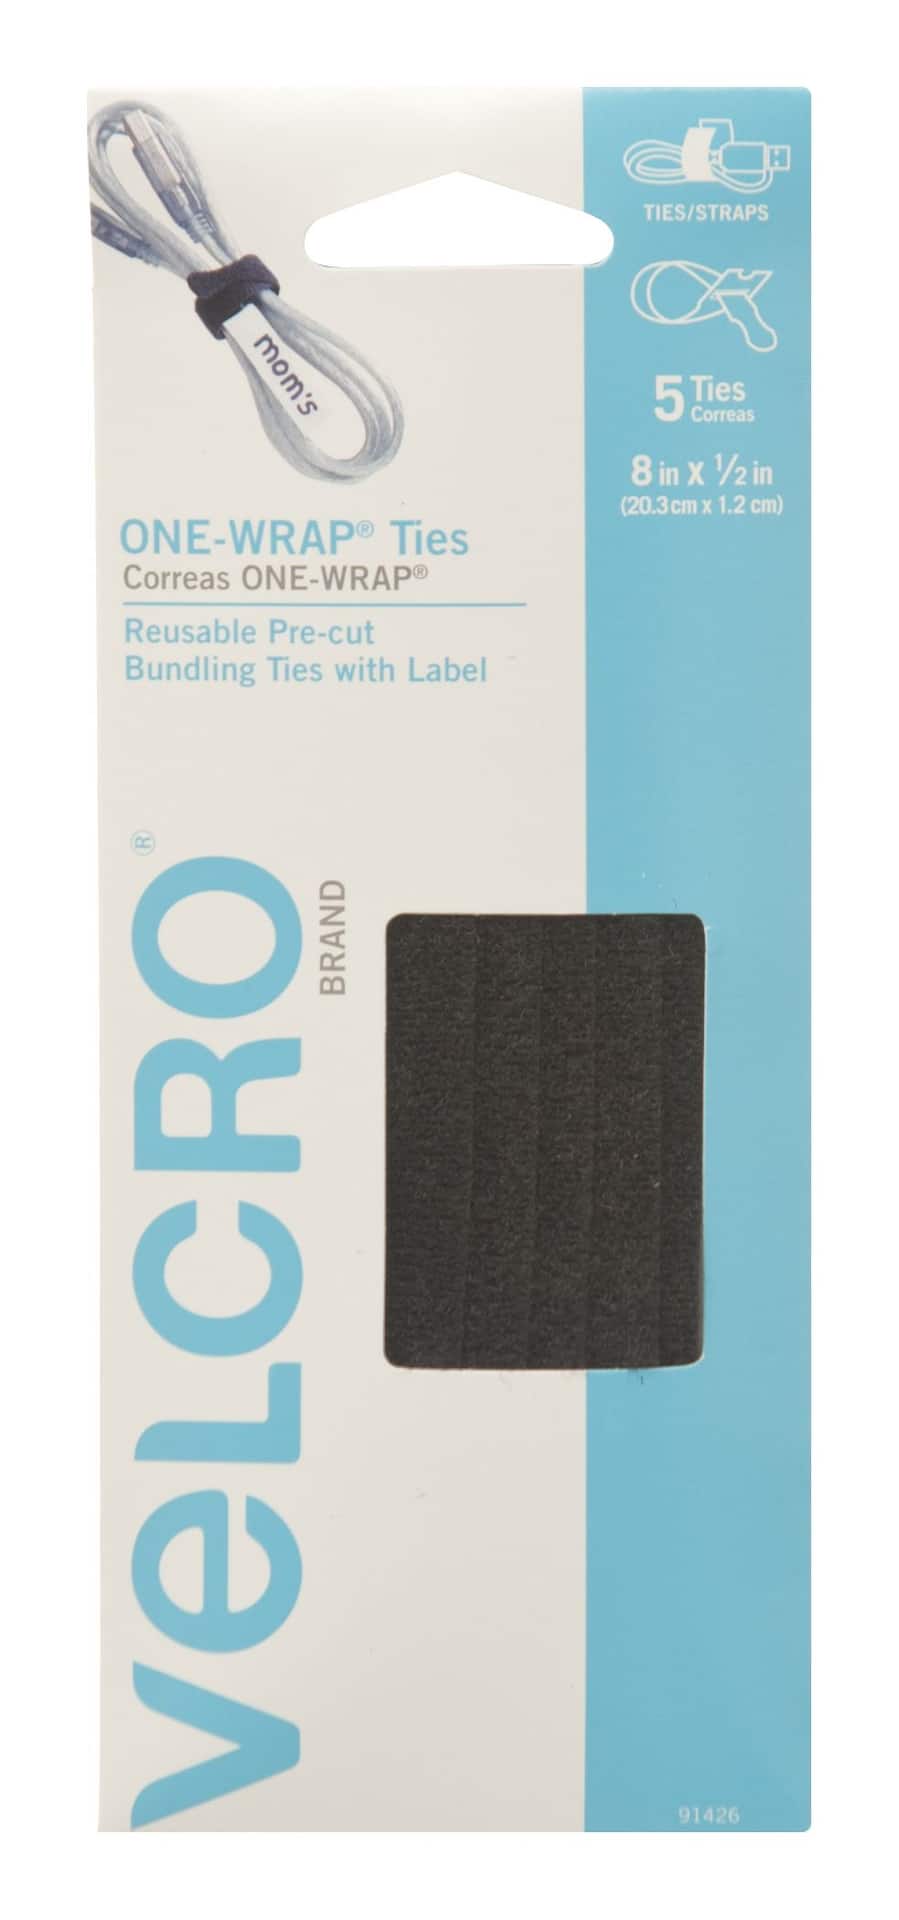 VELCRO Brand Heavy Duty Cable Ties Reusable | 60Pc Bulk Pack | 8 x 1/2  ONE-WRAP Straps, Black | Strong Wire Management | Cord Bundling for Home